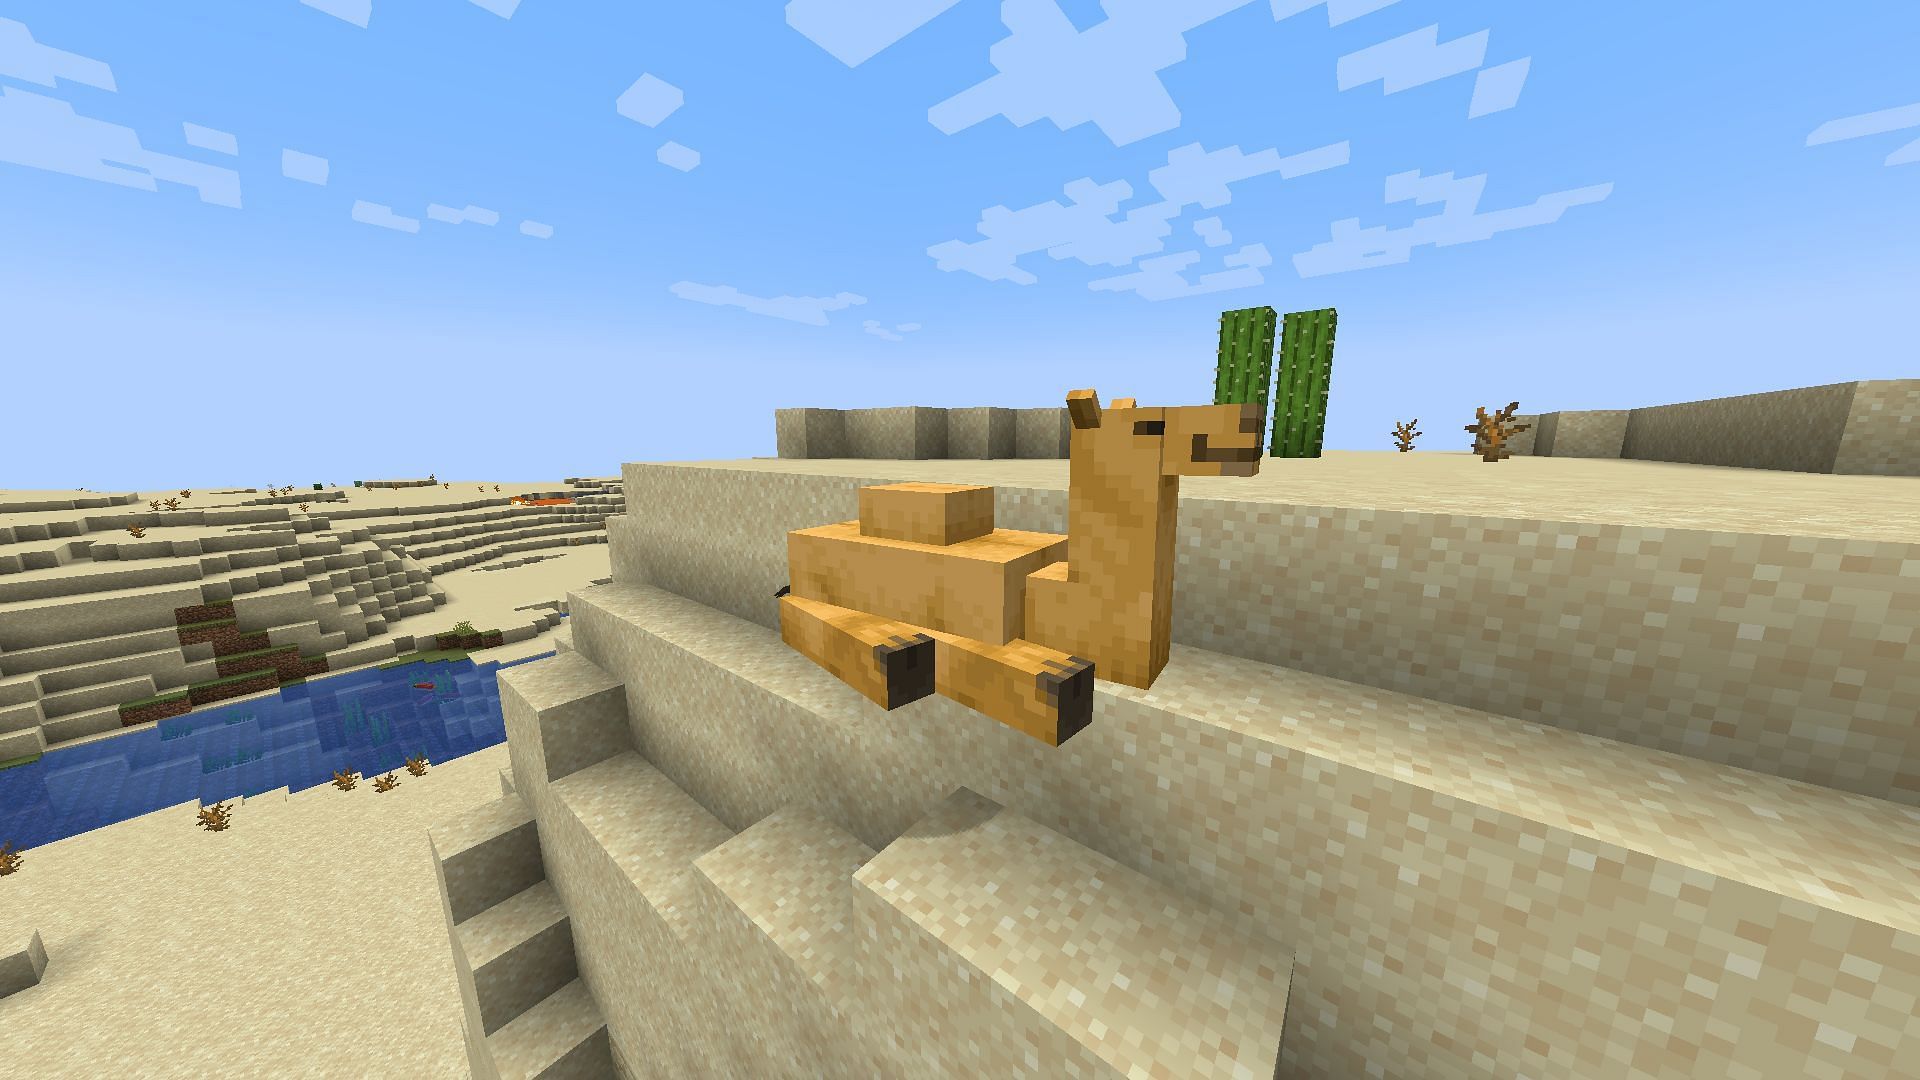 A camel sitting in the desert biome after spawning from a spawn egg (Image via Mojang)